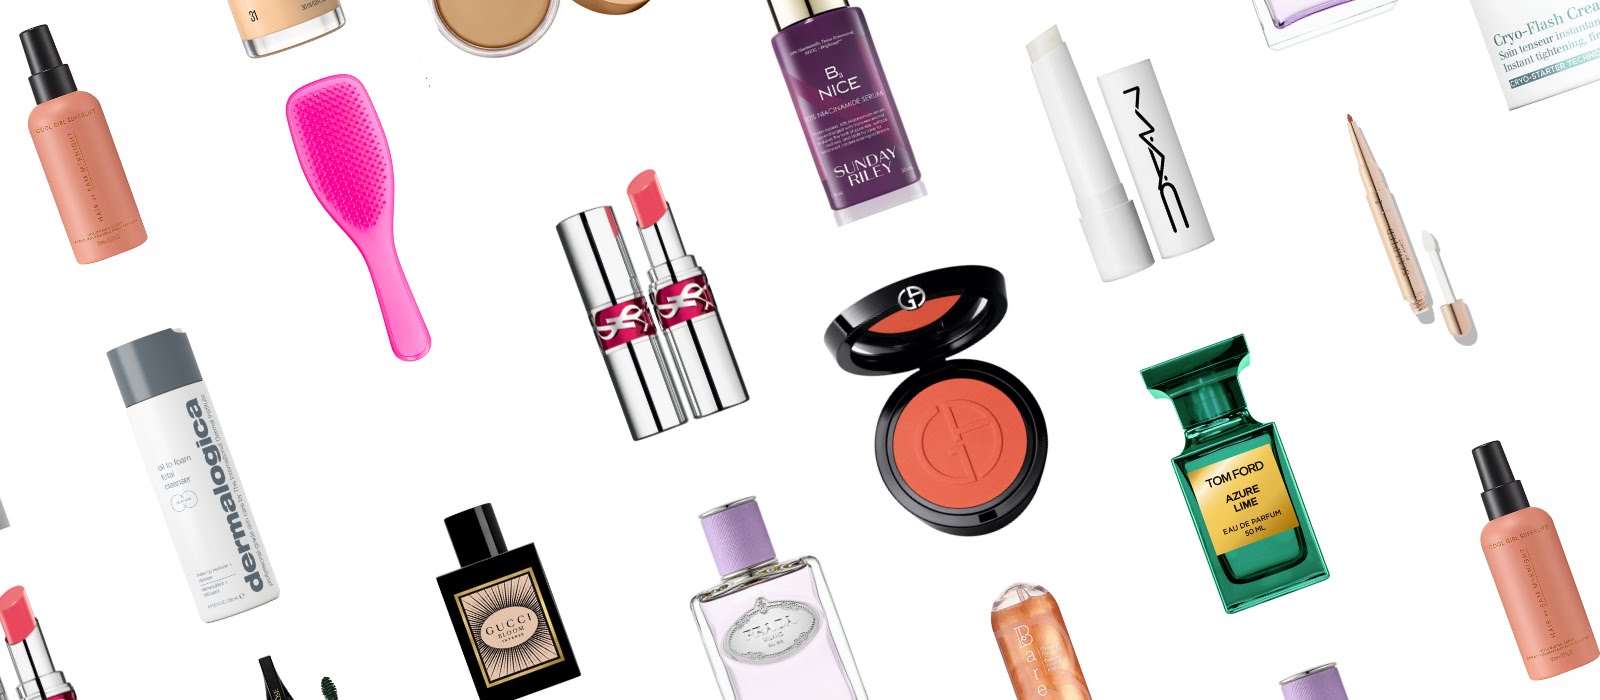 The best new beauty buys in July